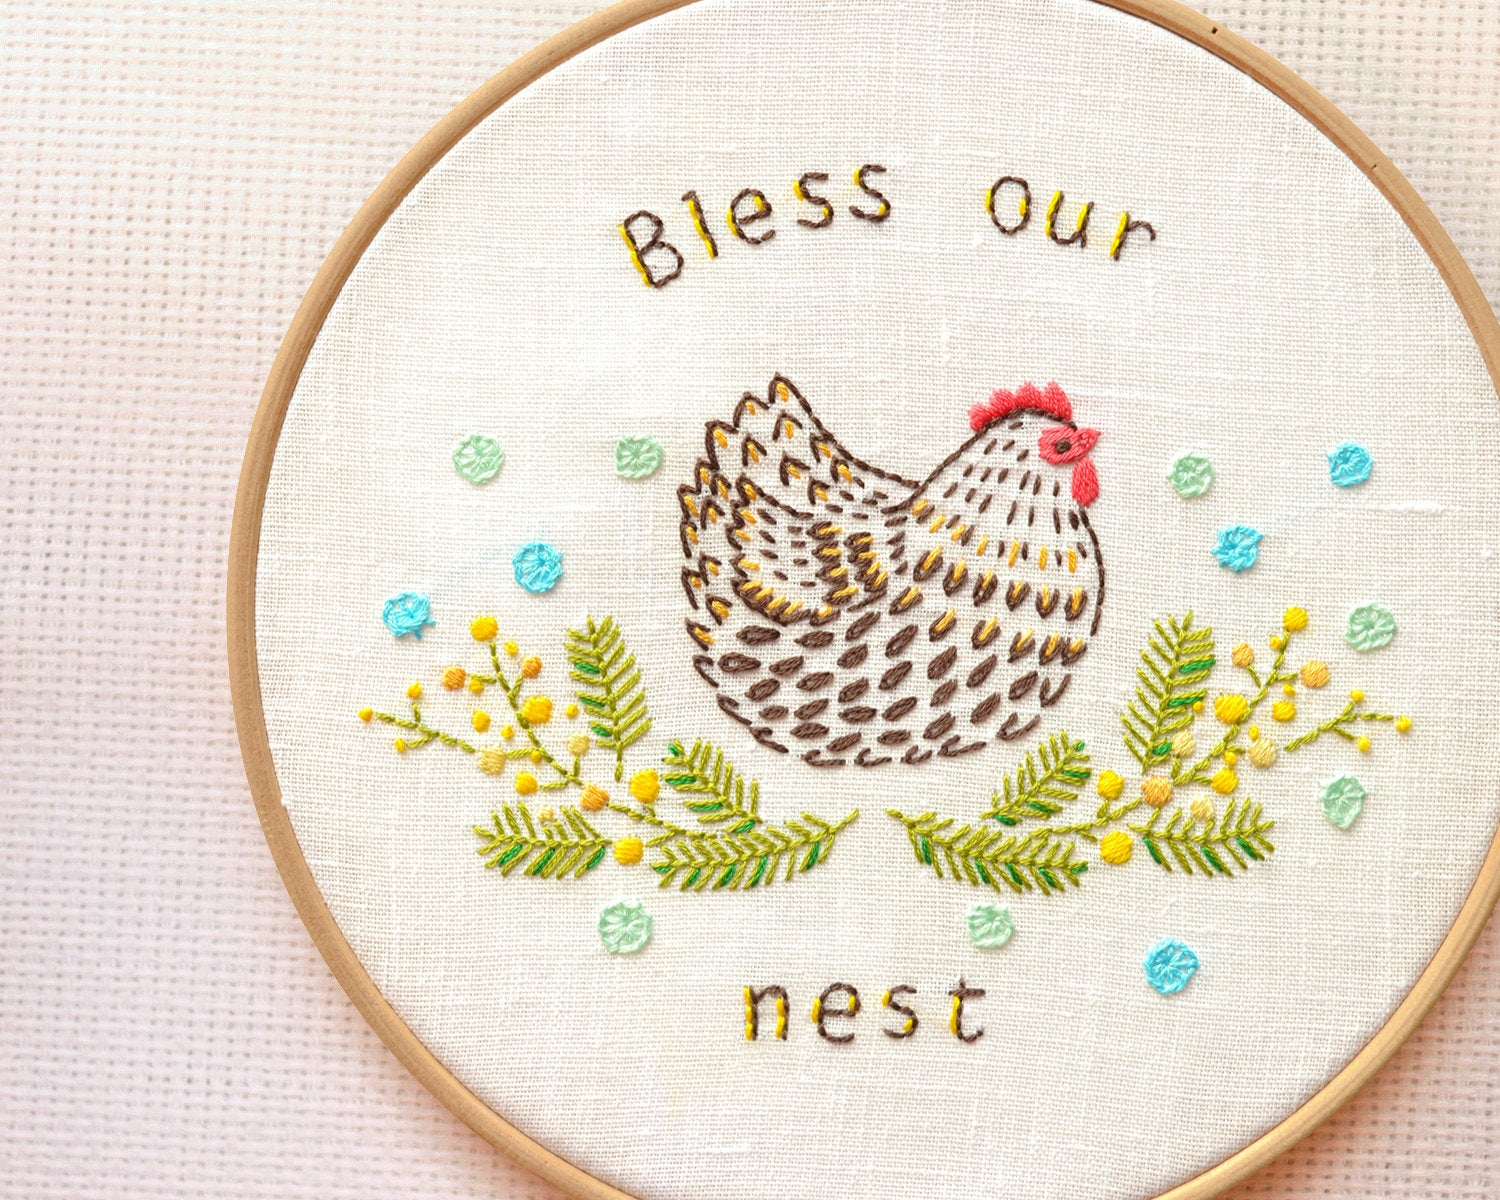 Easter Embroidery Patterns Hand Embroidery Patterns Pdf Chicken Decor Bless Our Nest Easter Embroidery Family Simbol Naiveneedle